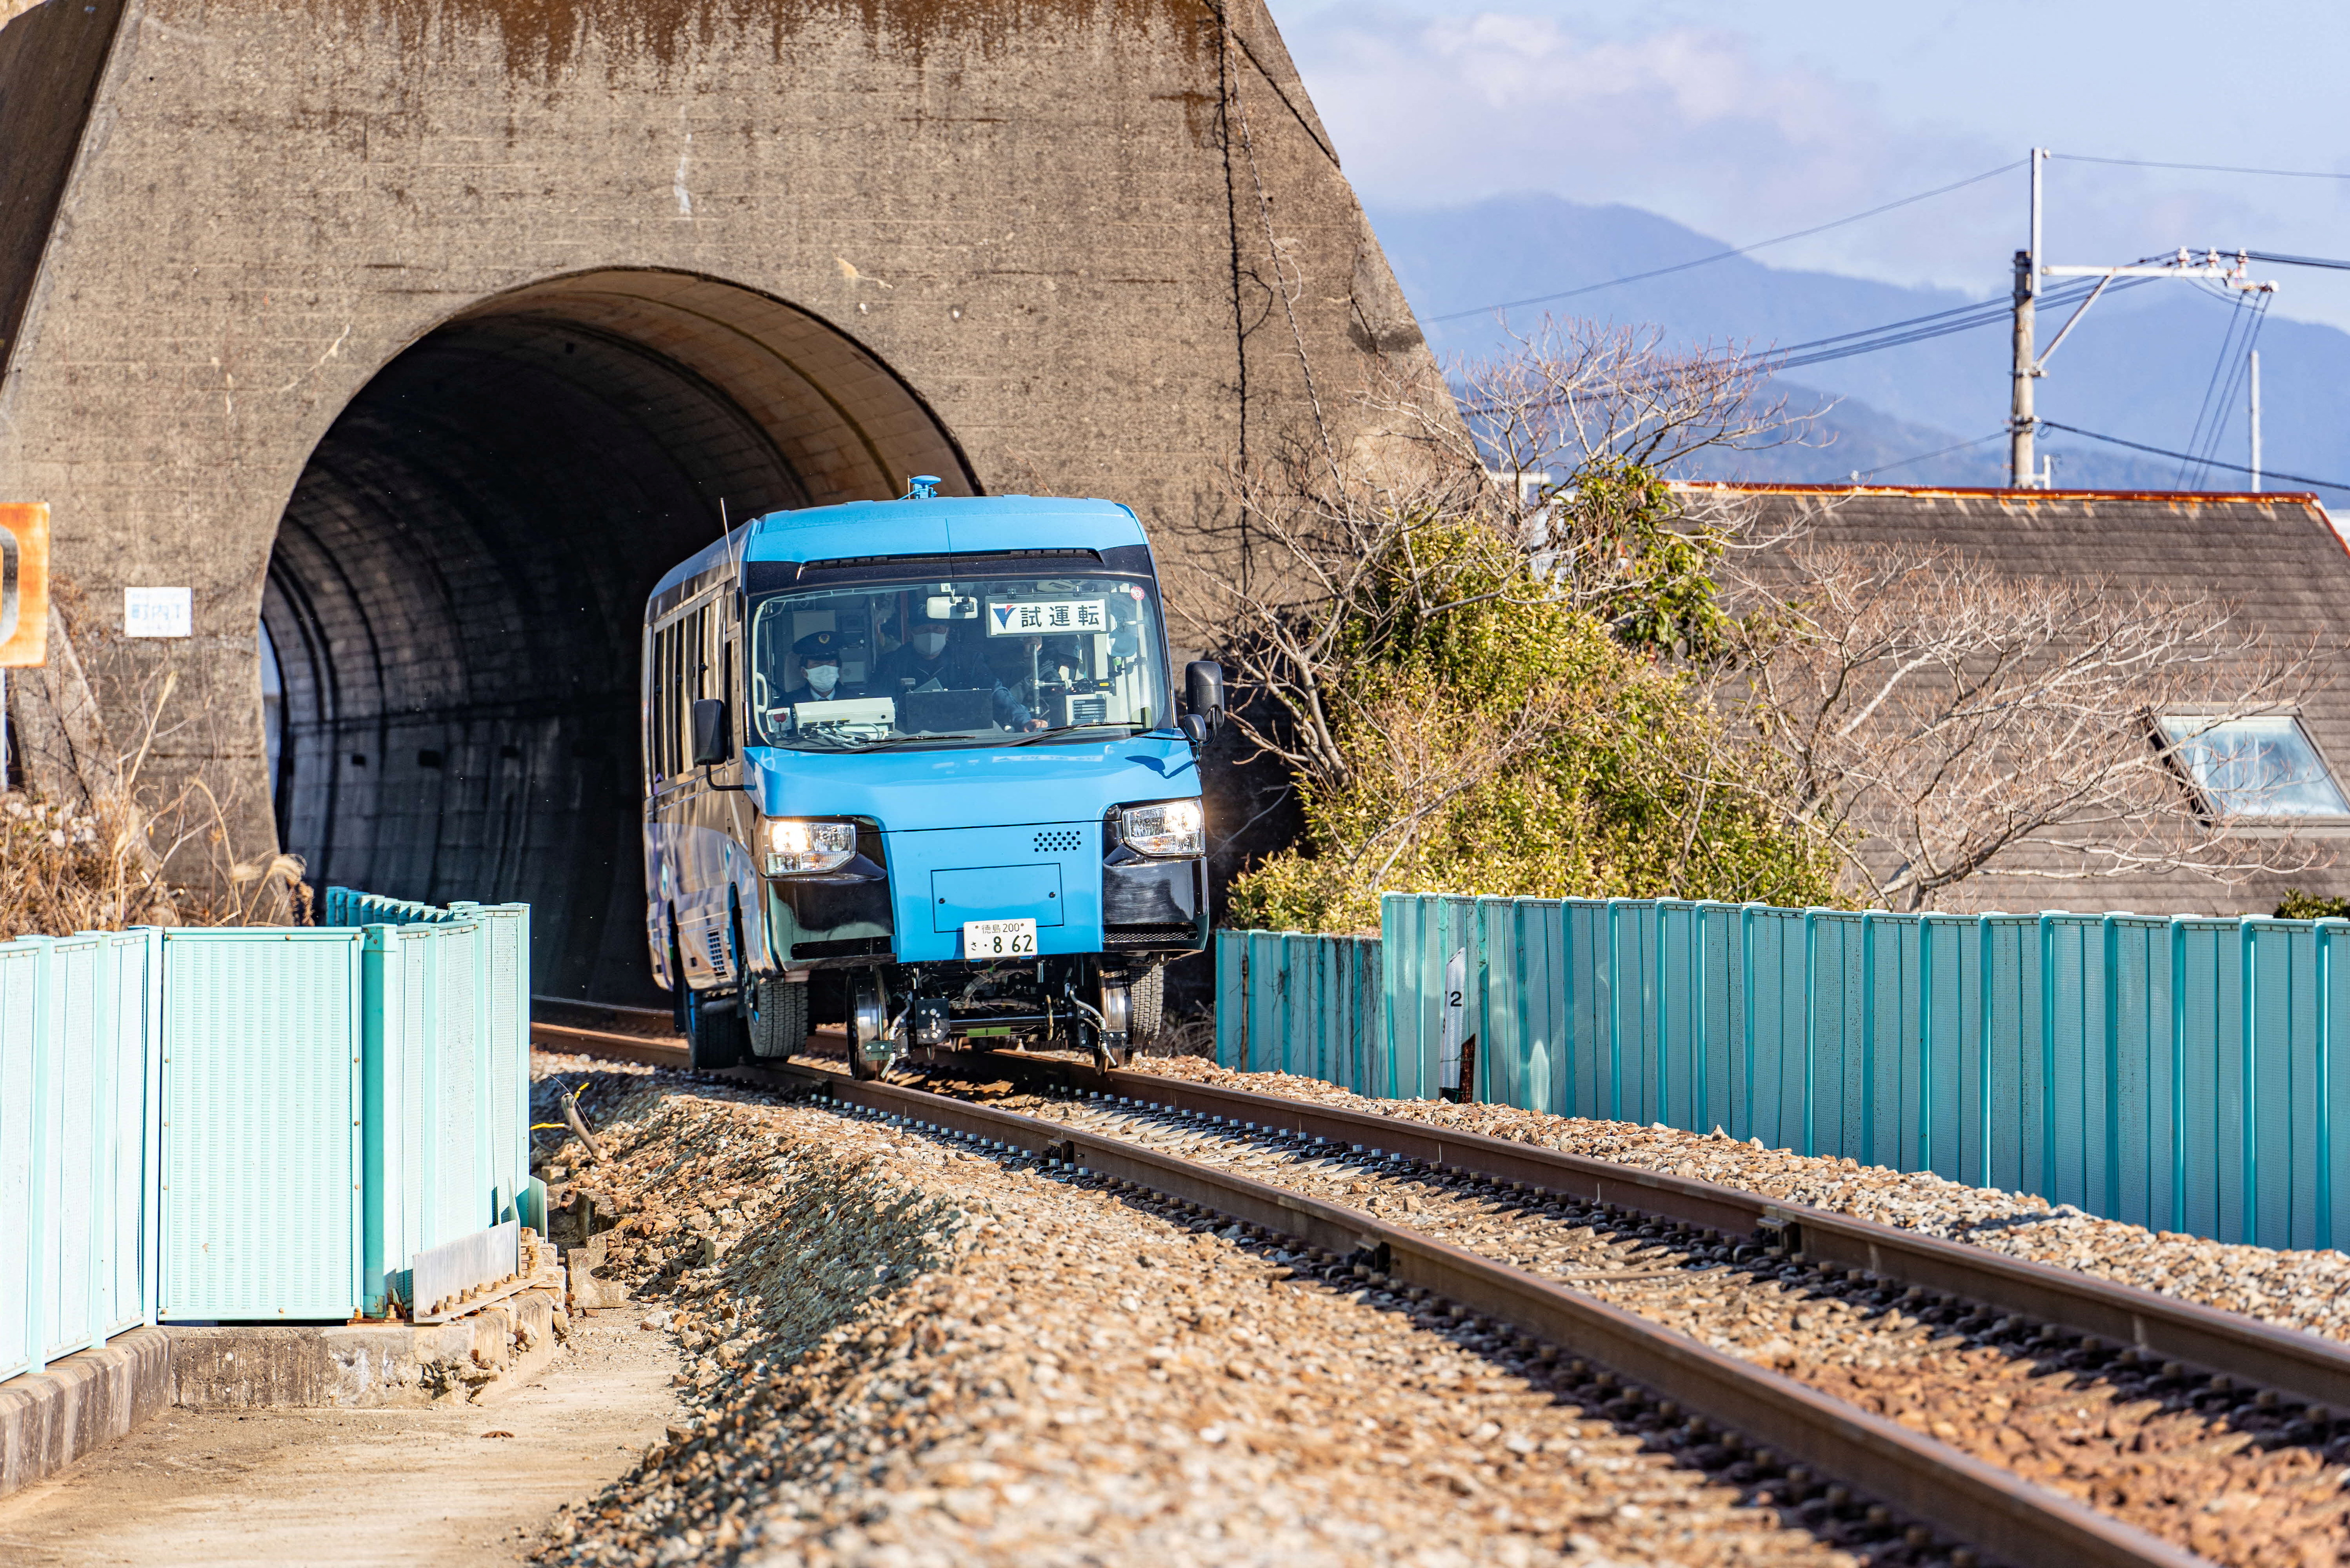 A 'Dual-Mode Vehicle (DMV)' bus that can run both on conventional road surfaces and a railway track, is seen during its test run in Kaiyo Town, Tokushima Prefectue, Japan, in this handout photo taken in March 2021 and released by Tokushima Prefectural Government, obtained by Reuters on December 24, 2021. Tokushima Prefectural Government/Handout via REUTERS  